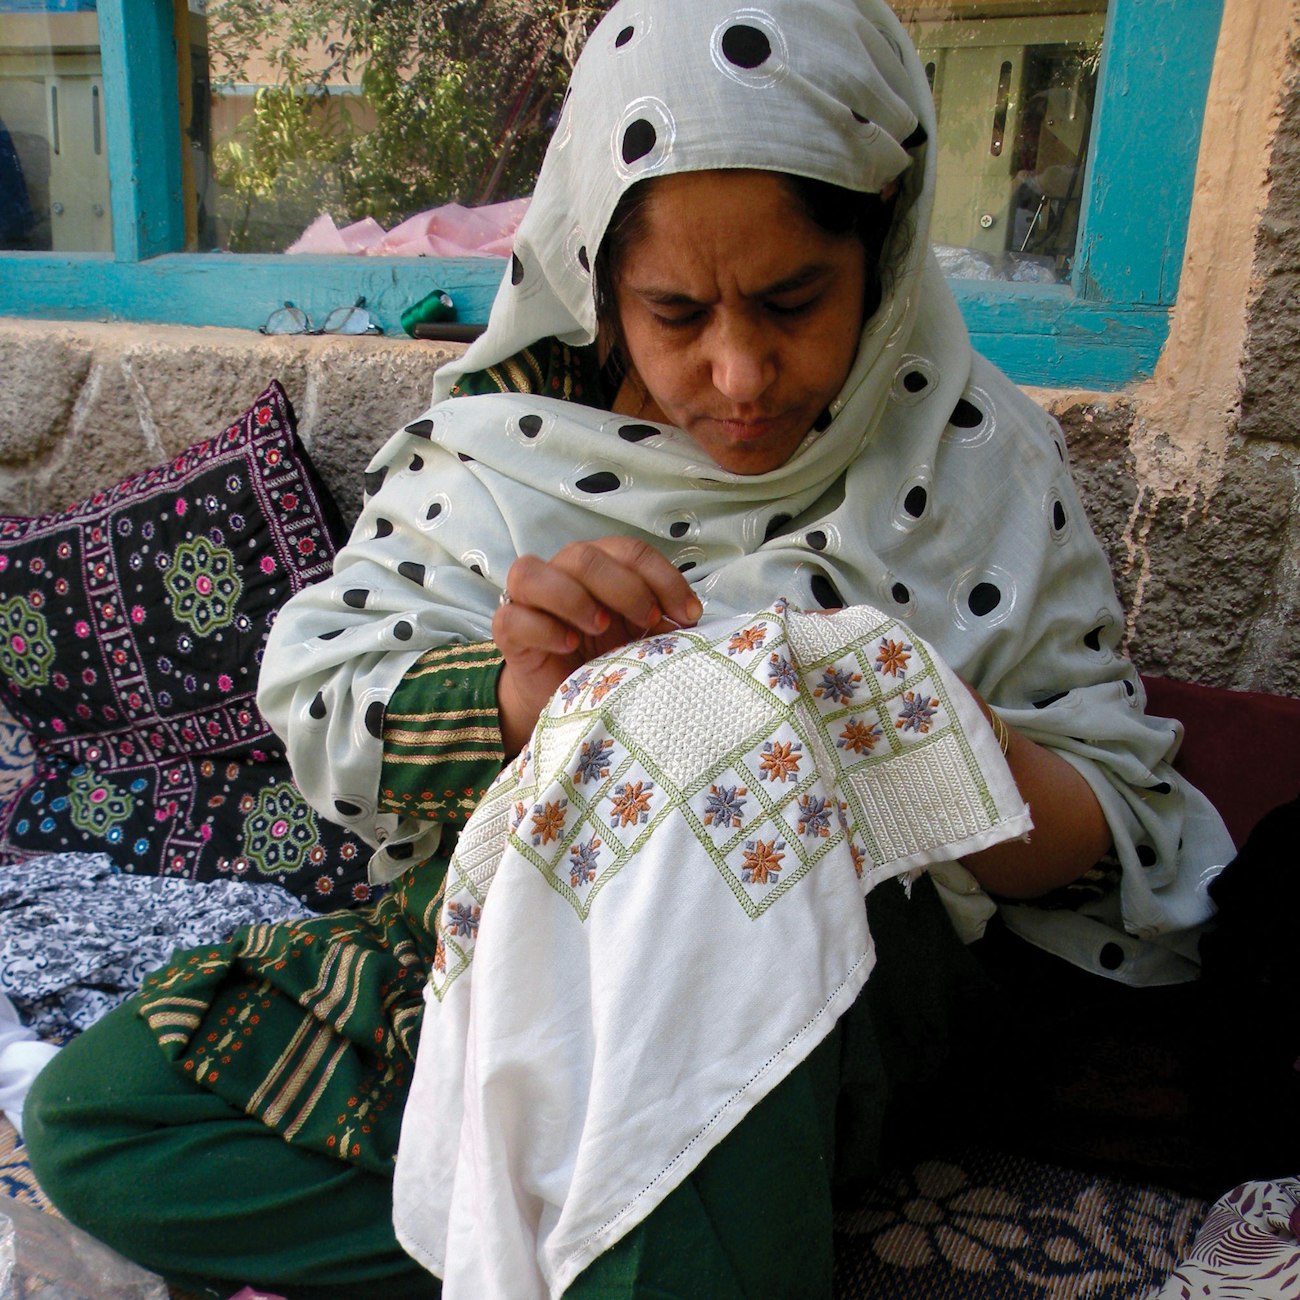 A woman with a gray spotted headscarf, seated on the ground, embroiders on a white ground cloth.